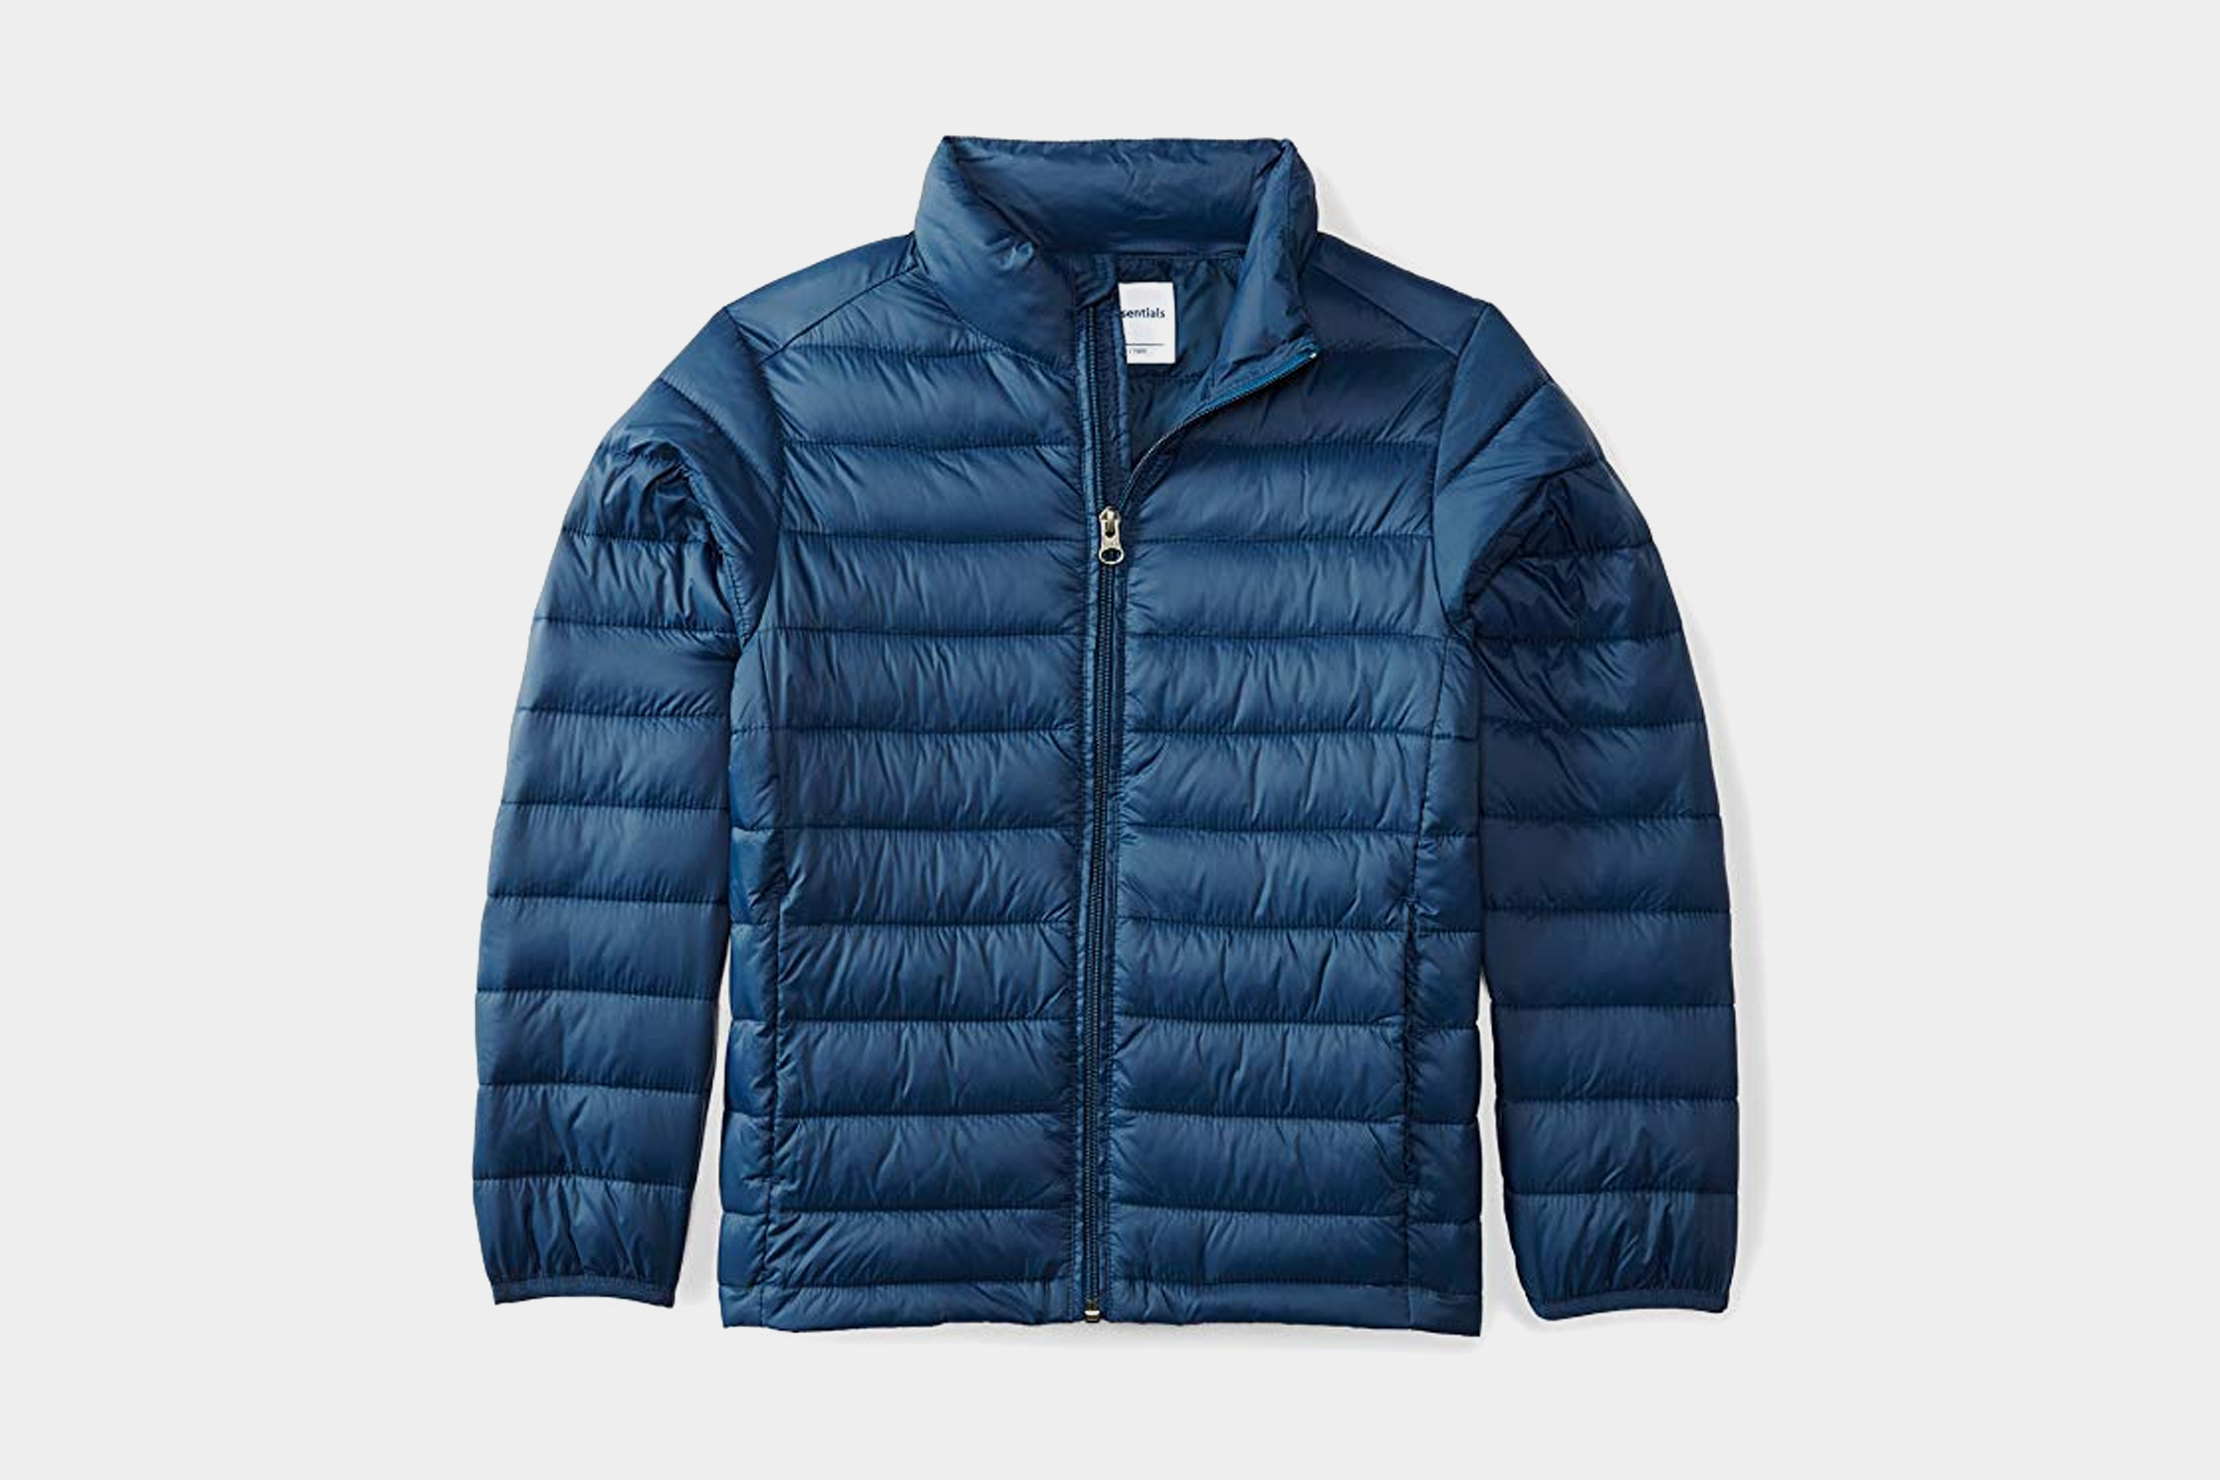 Essentials Boys and Toddlers' Heavy-Weight Puffer Vests